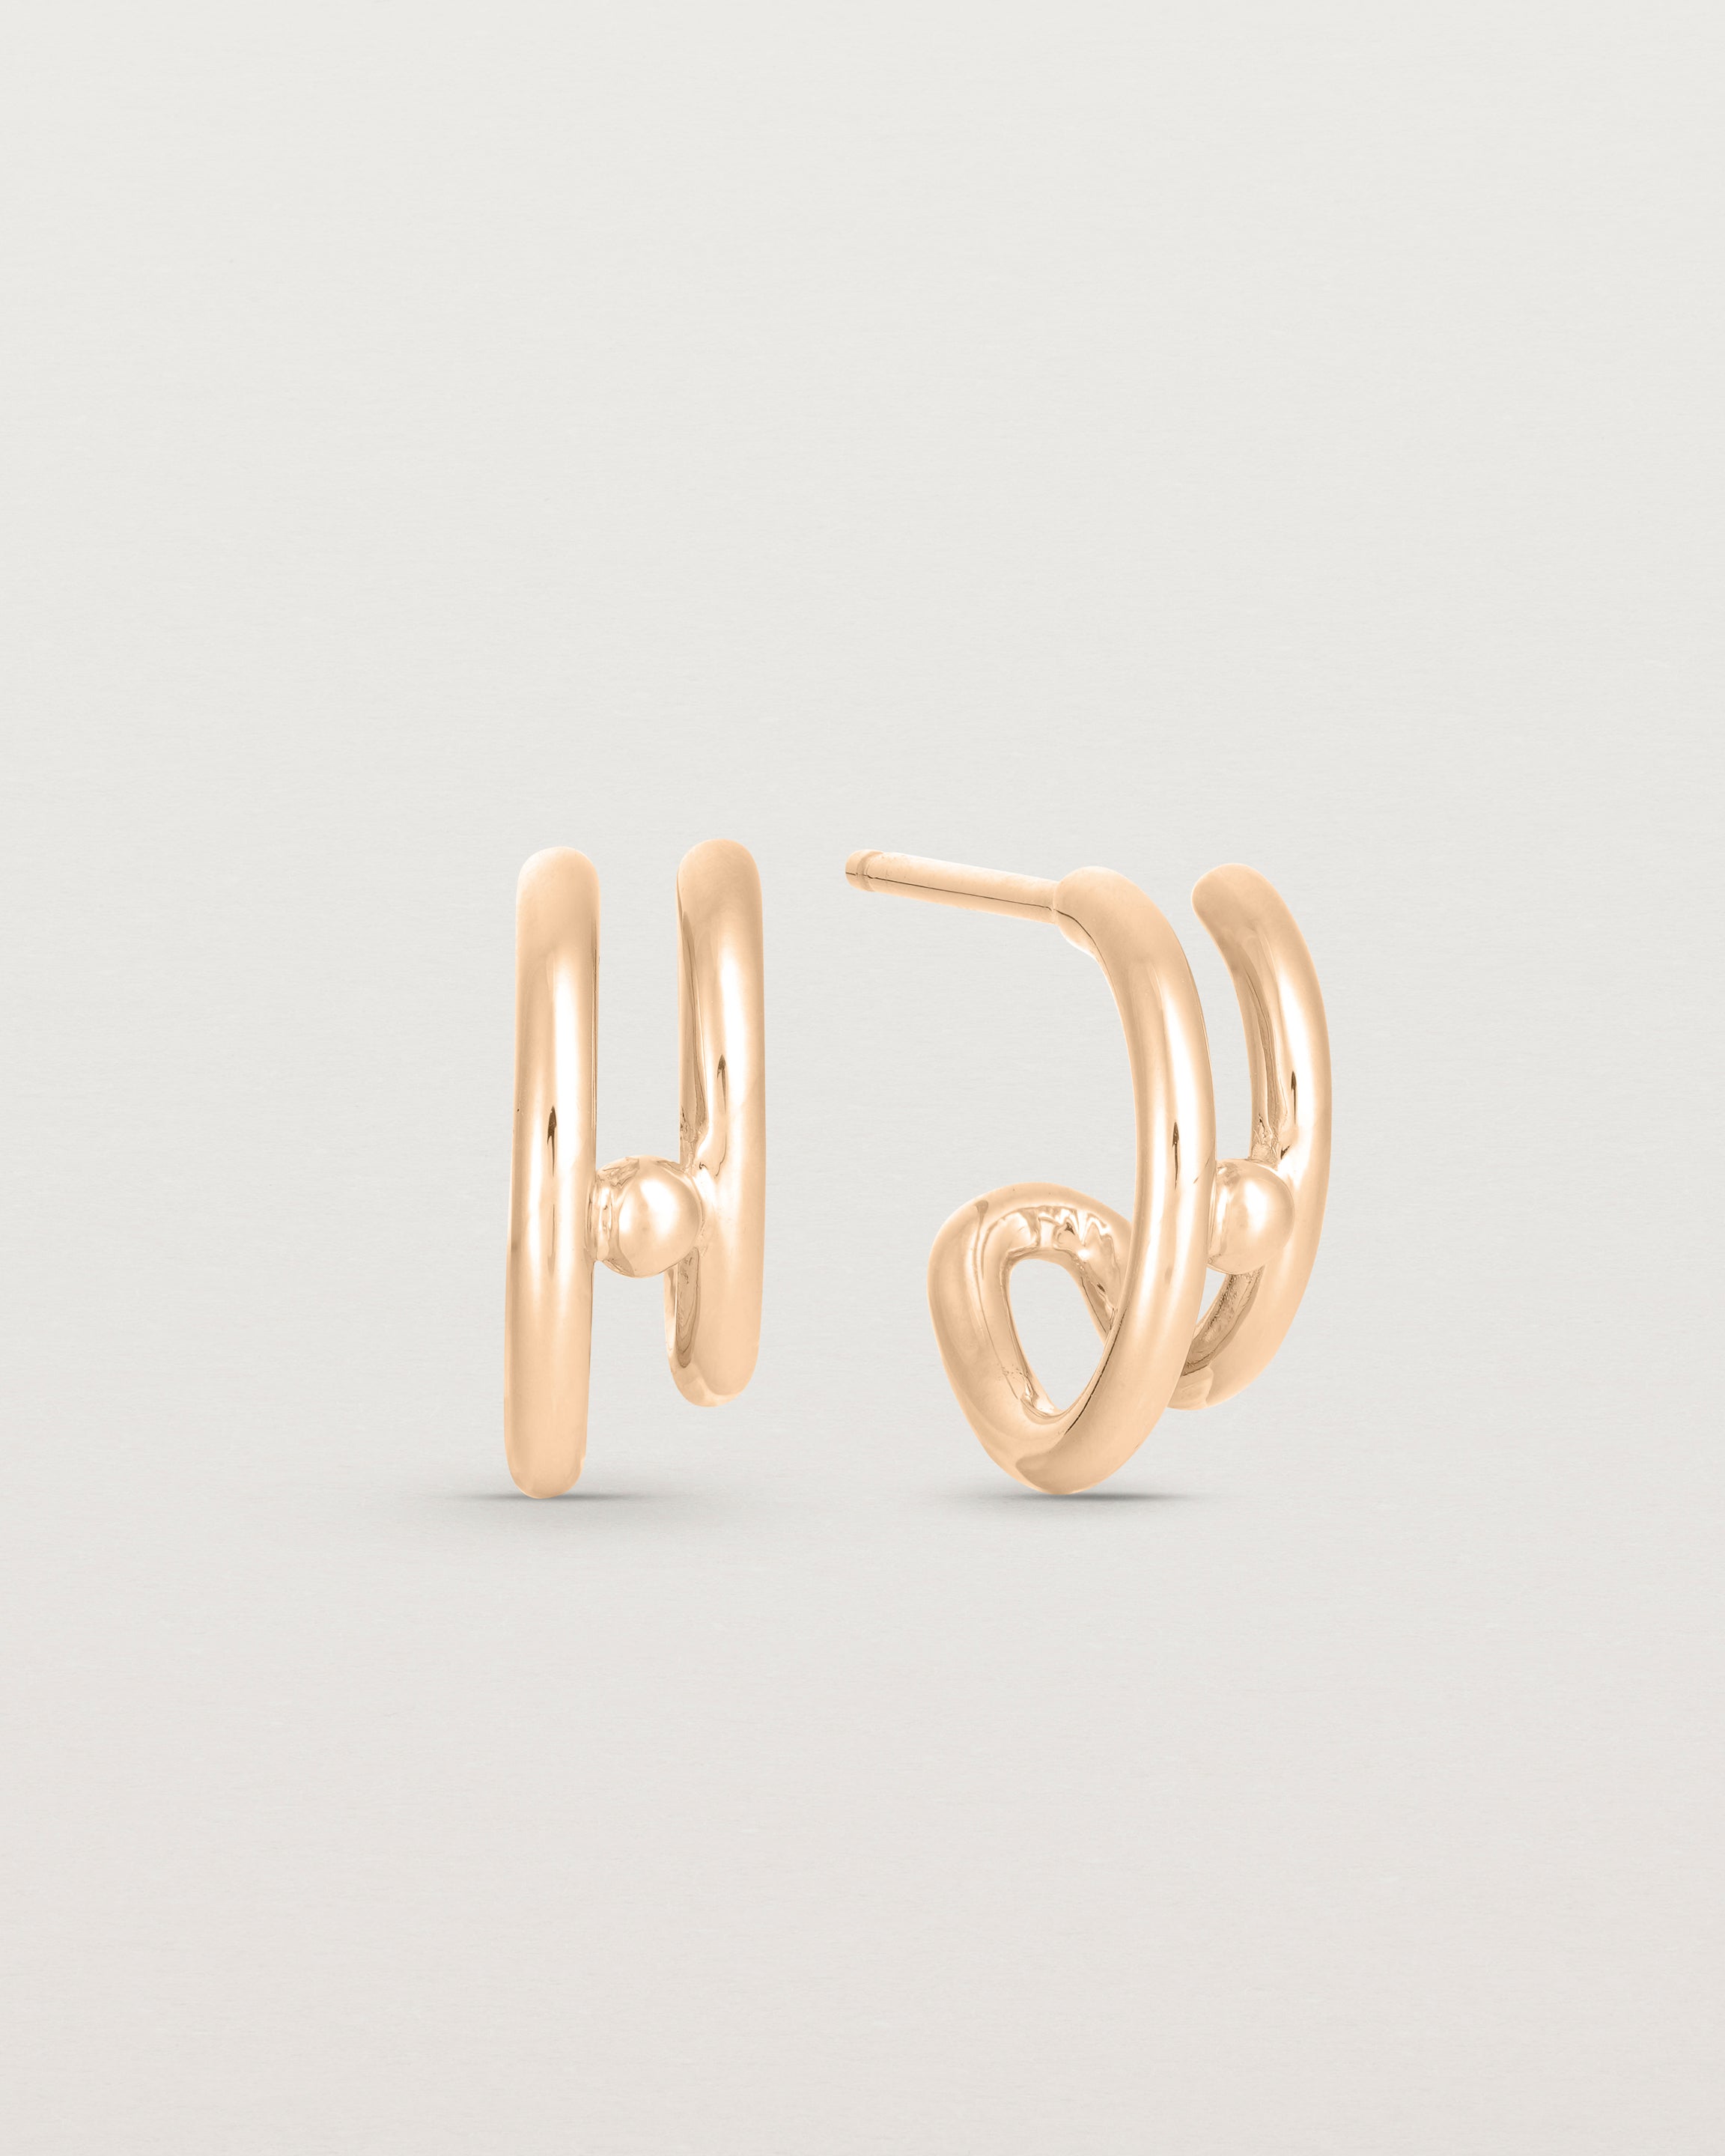 A pair of Double Reliquum Hoops in rose gold.